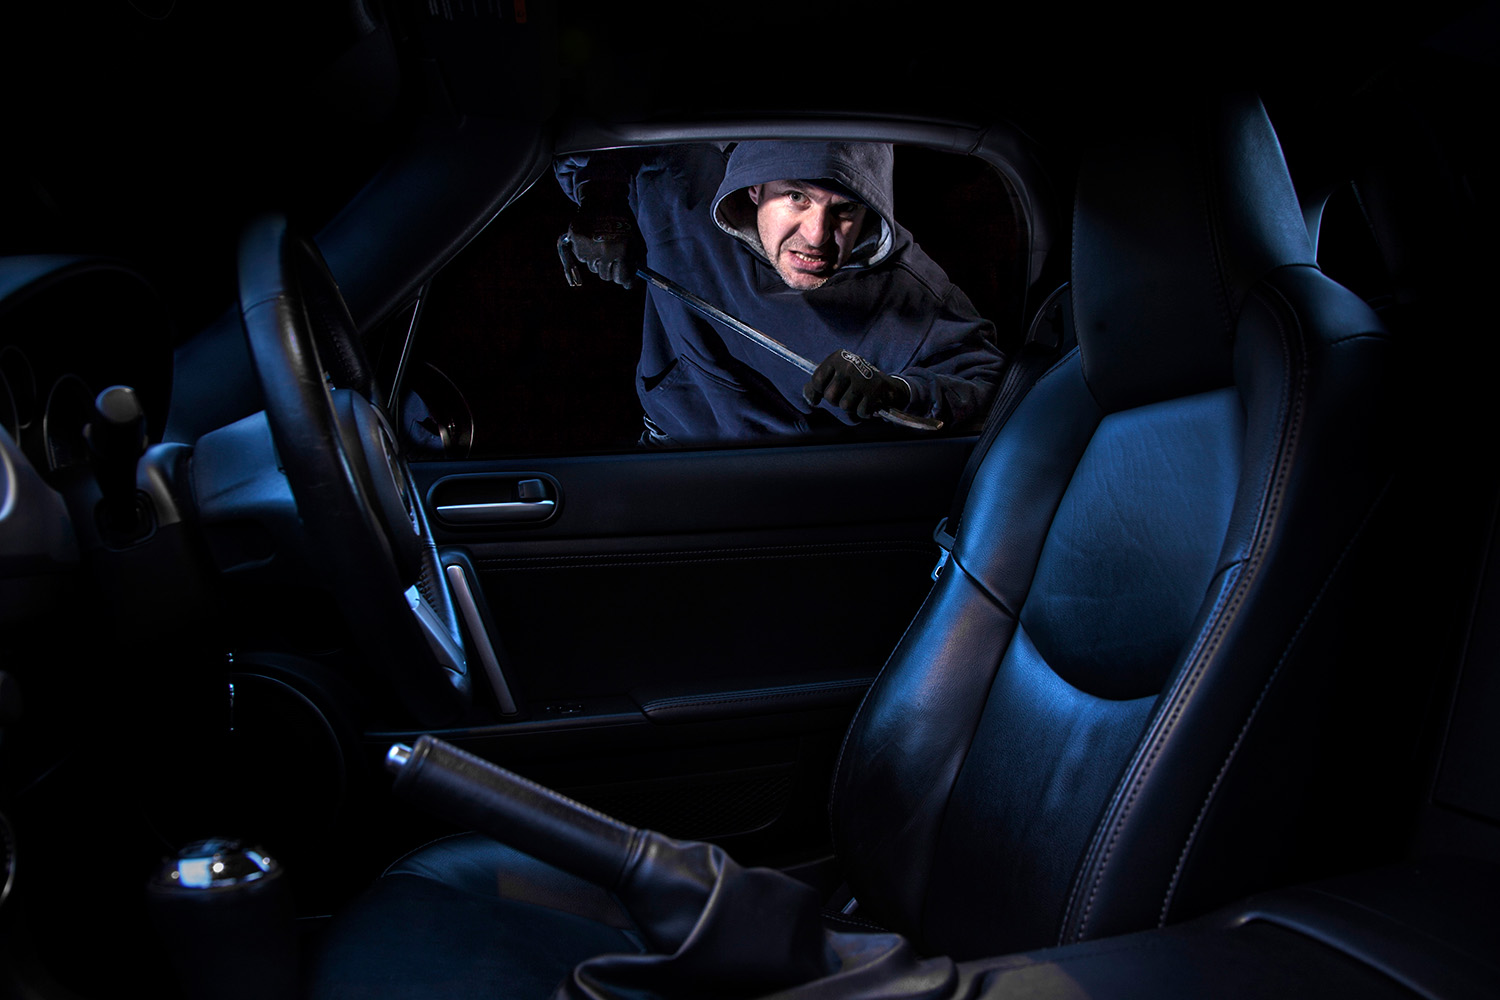 Thief breaks into car late at night with a crowbar